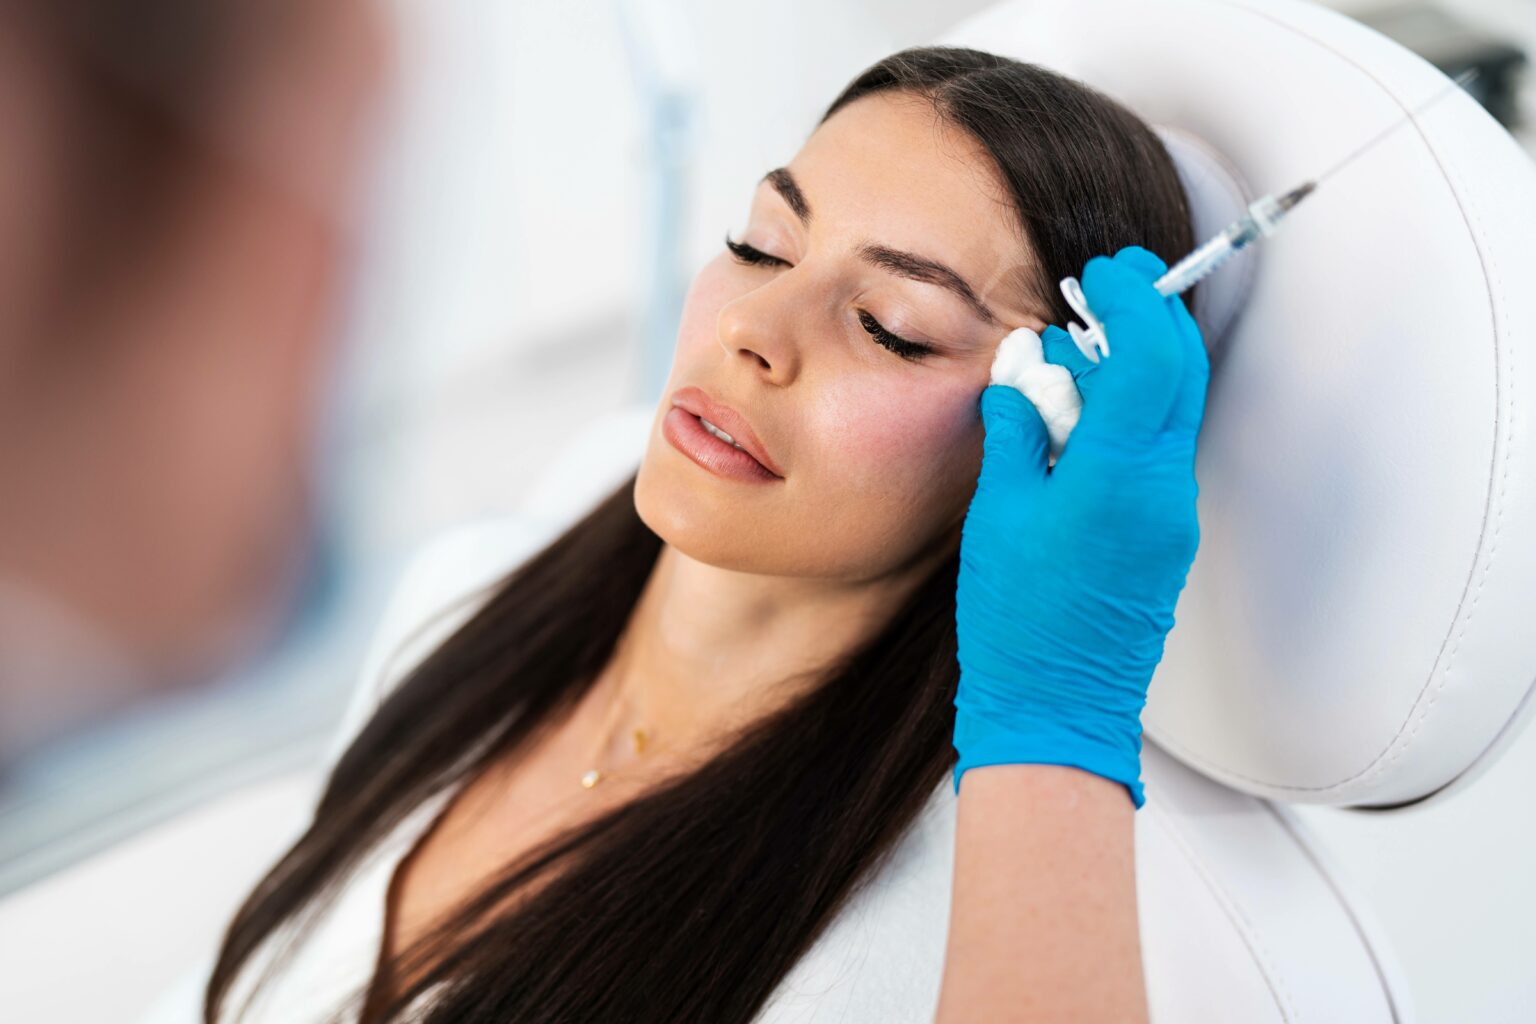 Facial fillers vs Botox: Which Is Right for You?